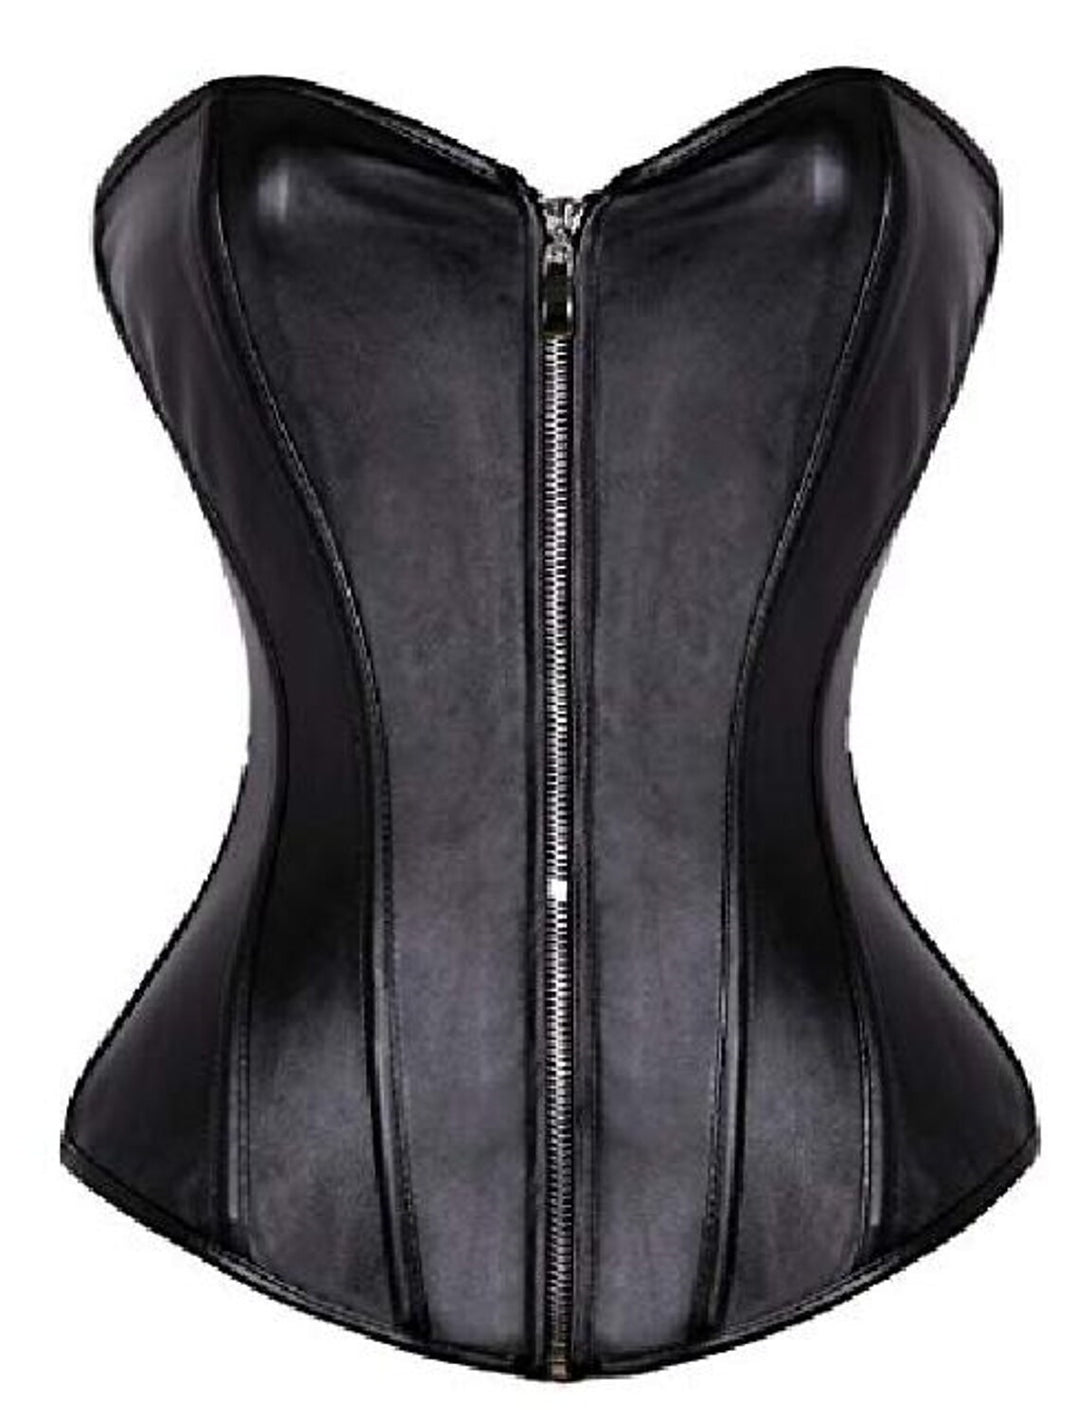 Women‘s Sexy Zipper Push Up Overbust Corsets for Wedding Party Birthday